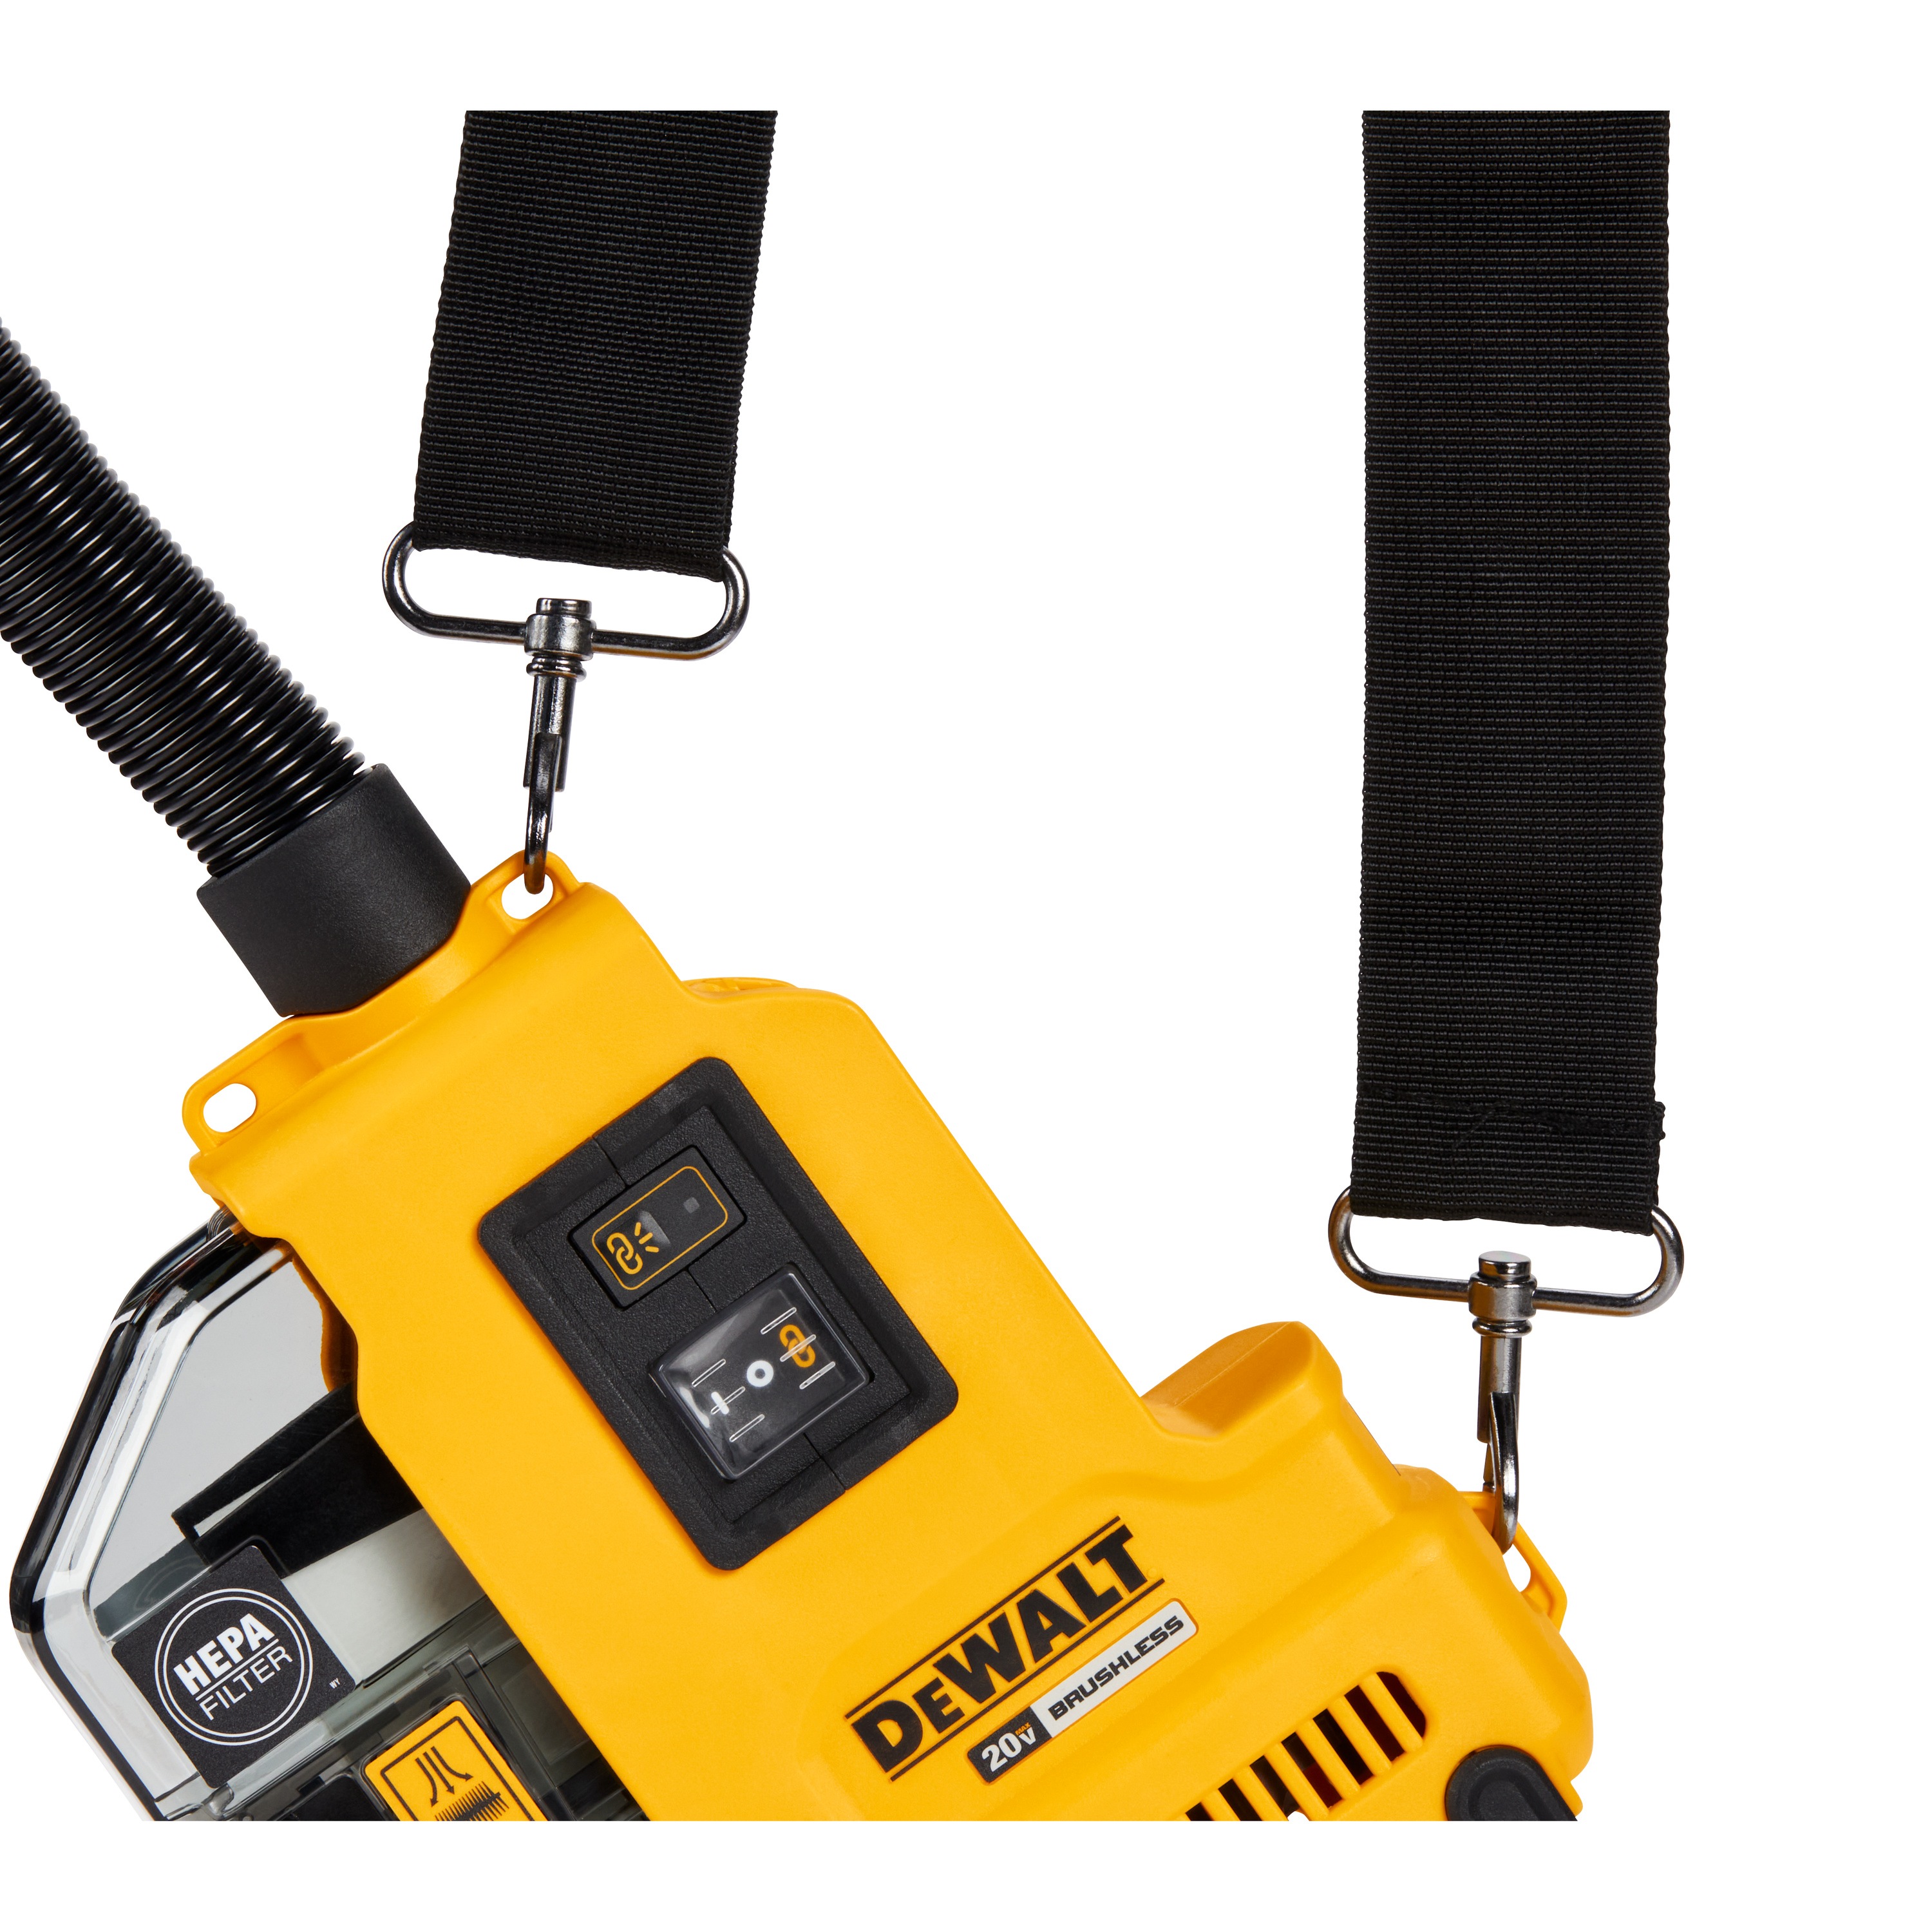 DEWALT - 20V MAX Brushless Cordless Universal Dust Extractor Tool Only - DWH161B